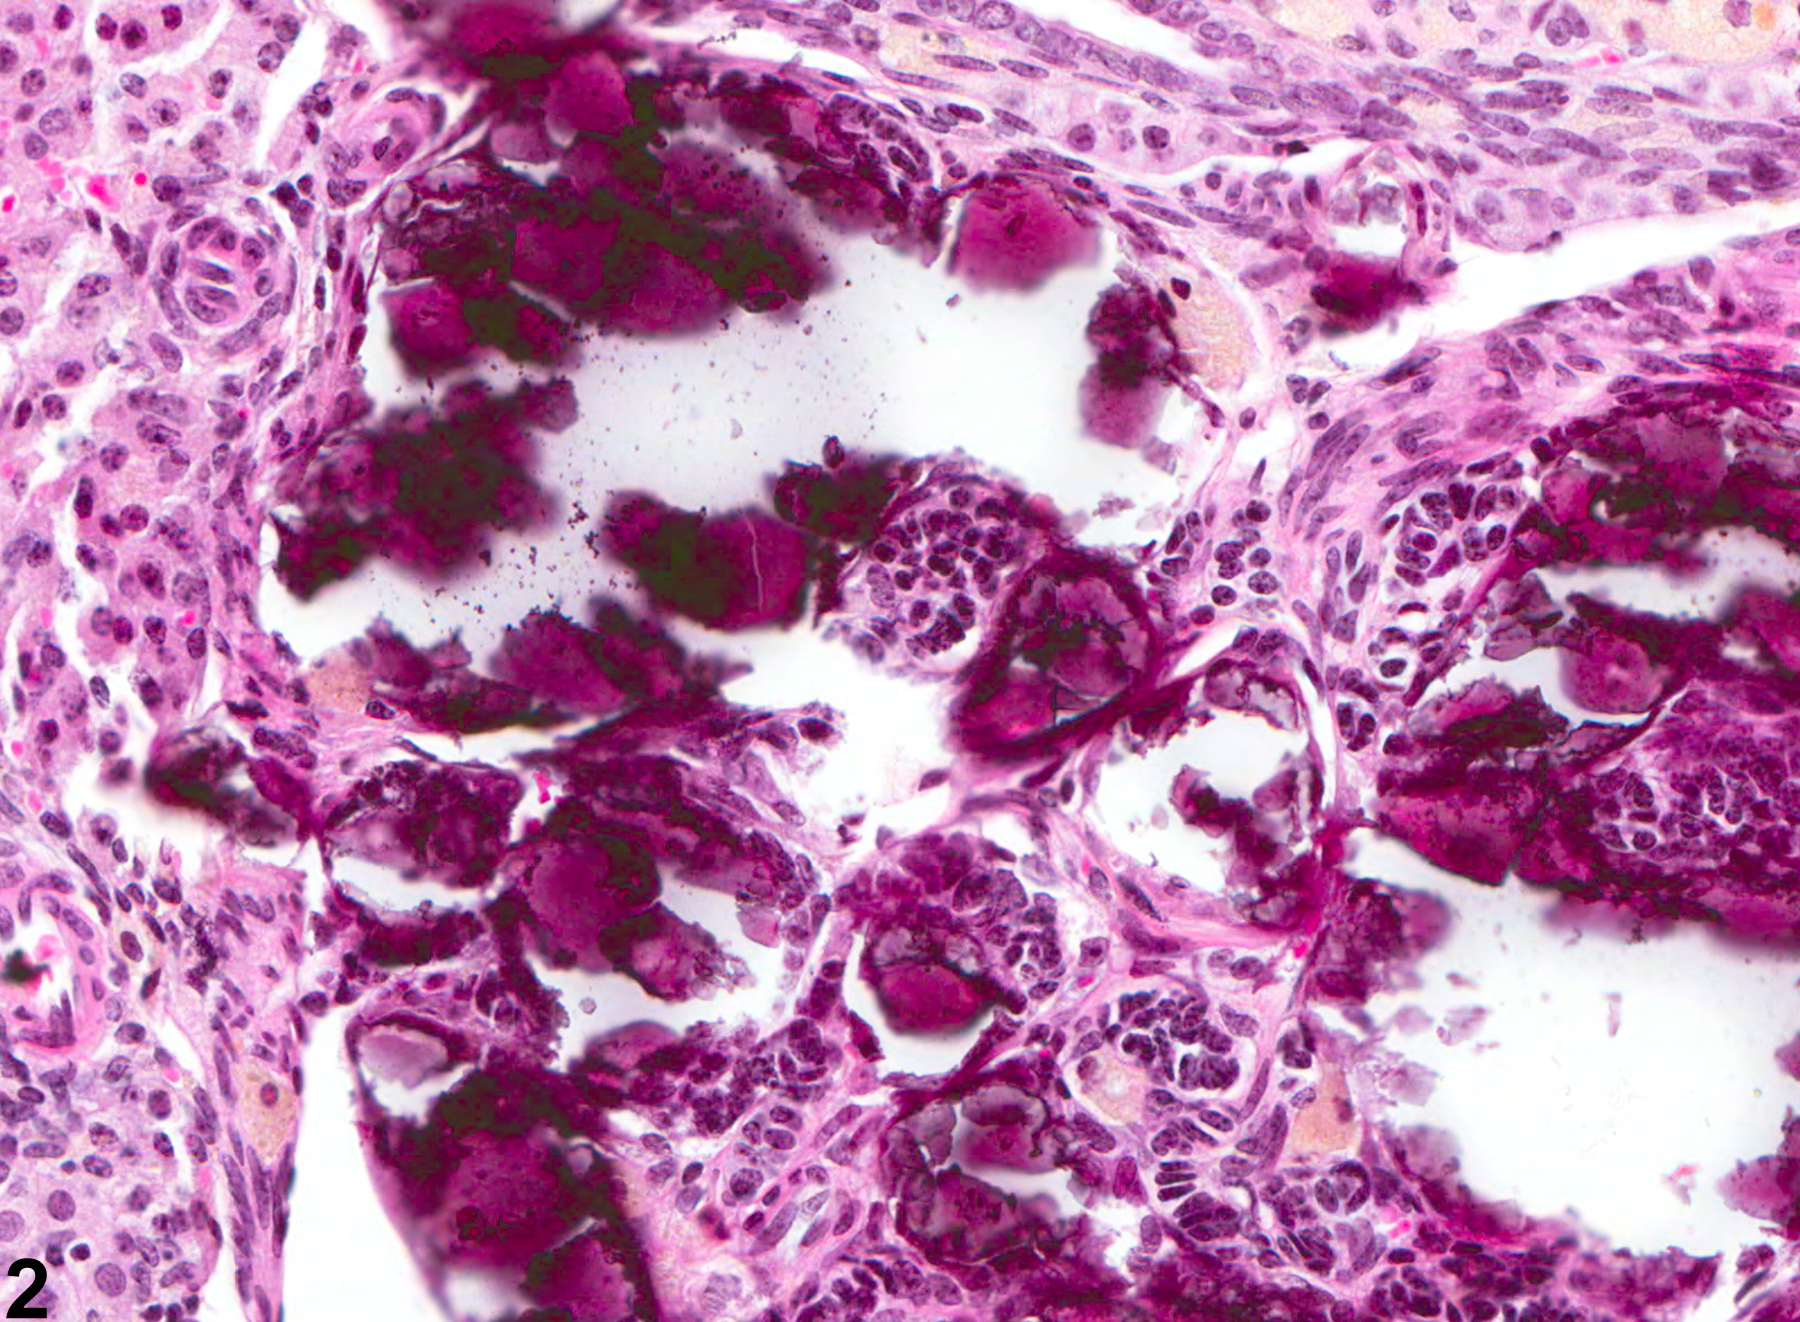 Image of mineral in the ovary from a female B6C3F1 mouse in a chronic study